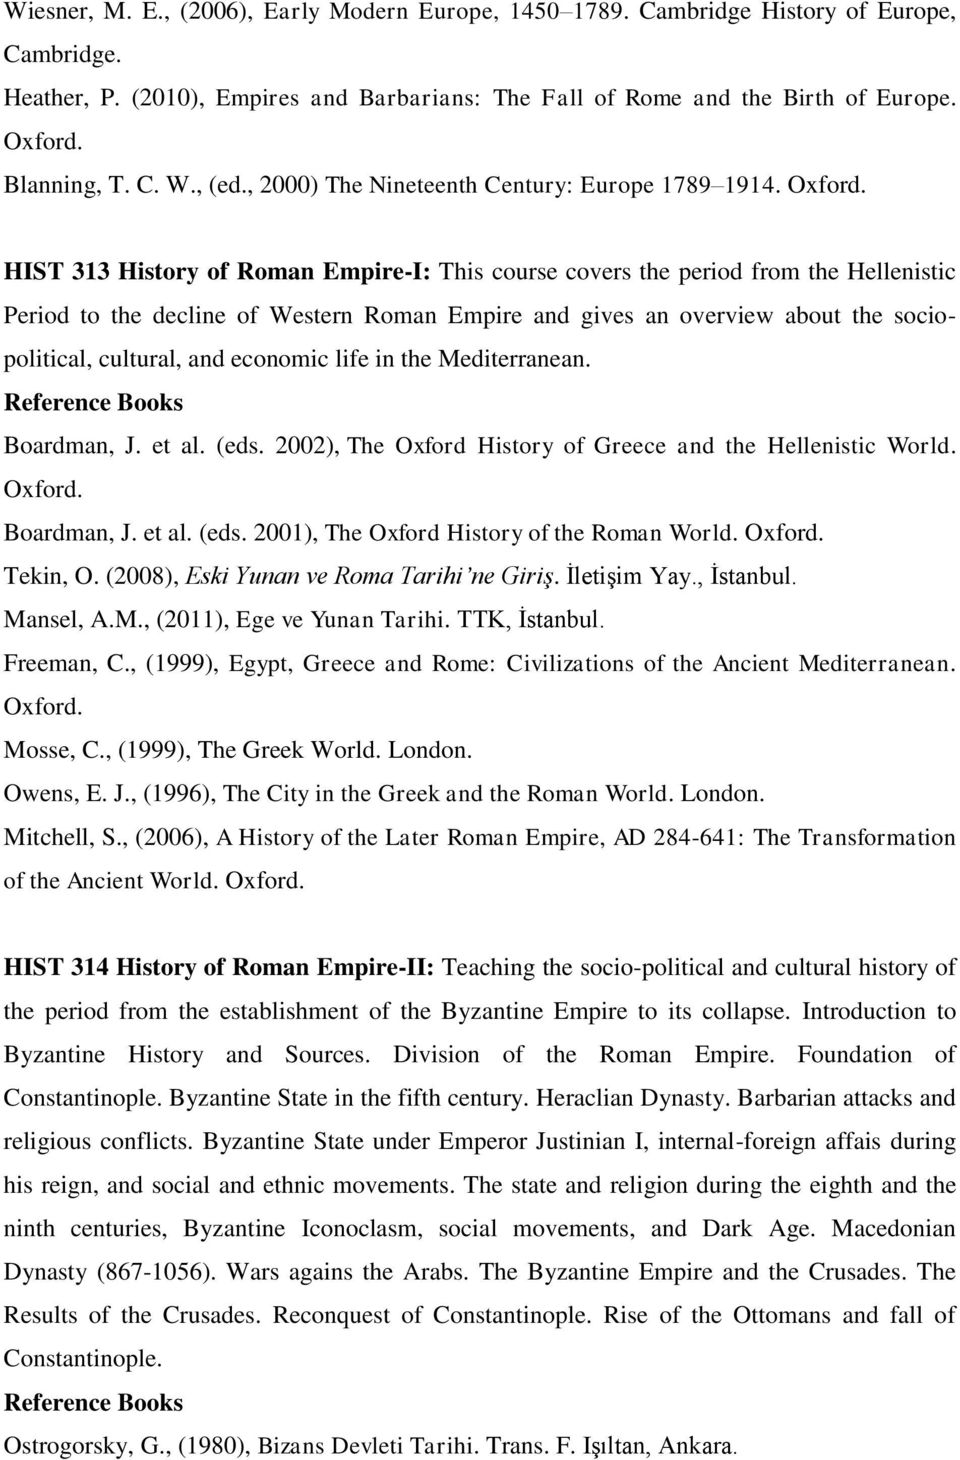 HIST 313 History of Roman Empire-I: This course covers the period from the Hellenistic Period to the decline of Western Roman Empire and gives an overview about the sociopolitical, cultural, and